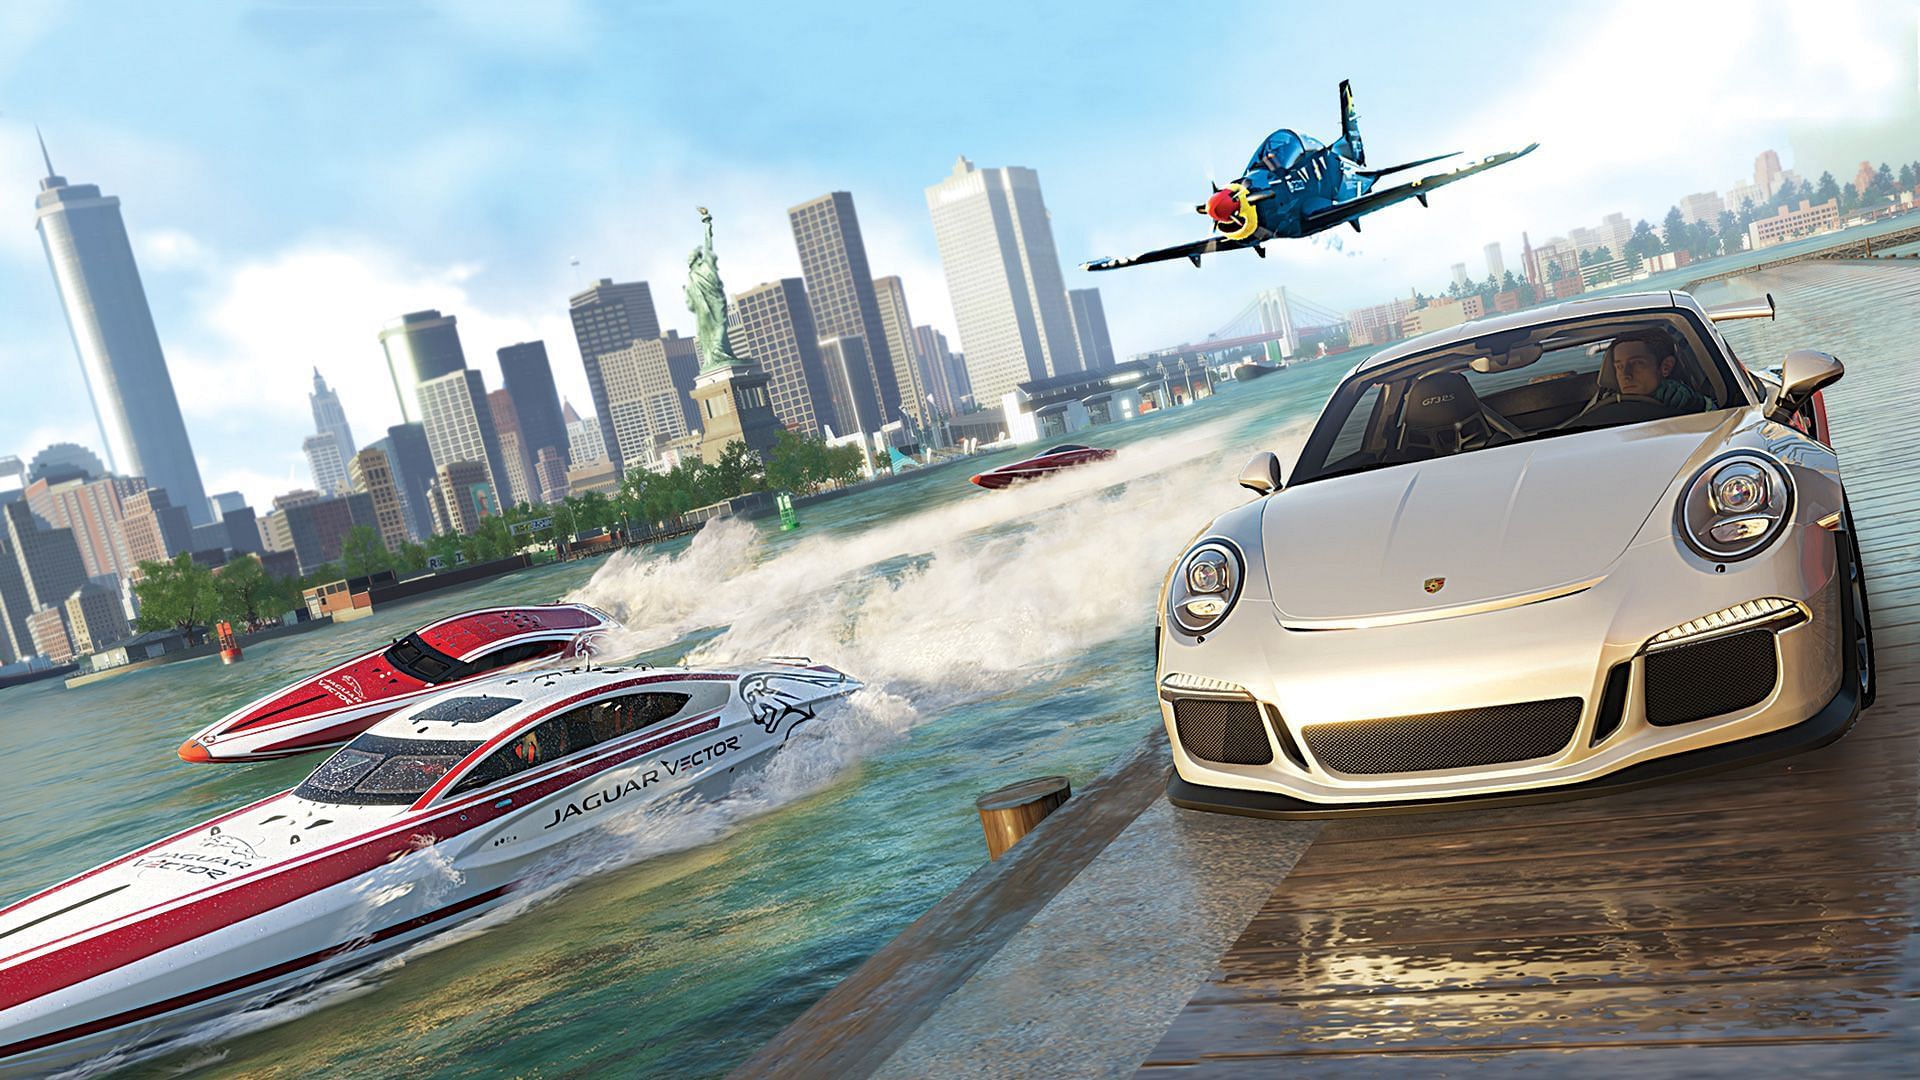 The Crew 2 also has motorcycles, boats, and airplanes (Image via Ubisoft)